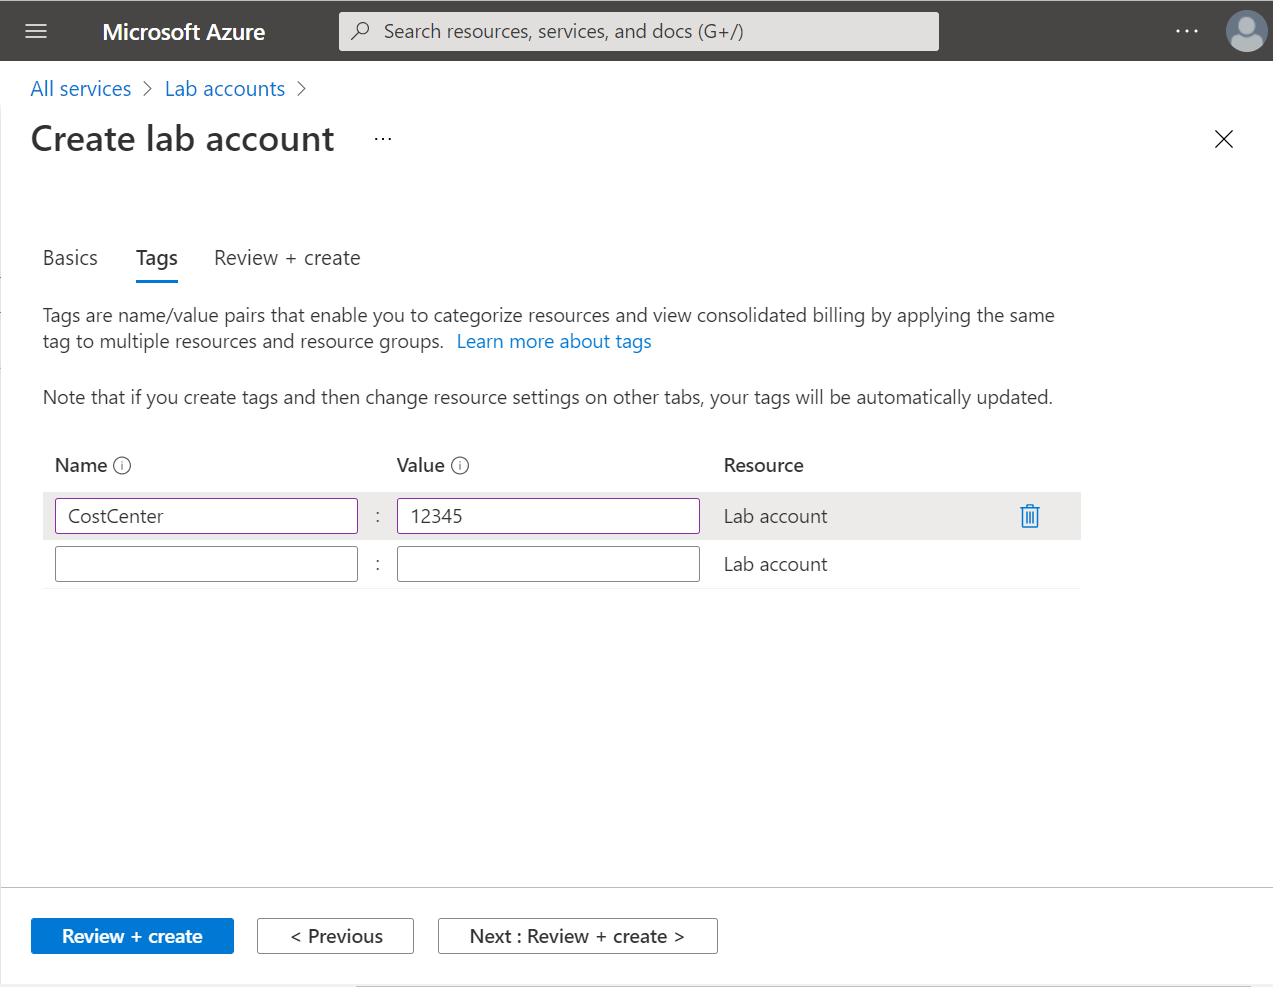 Screenshot that shows the Tags tab of the Create lab account wizard.